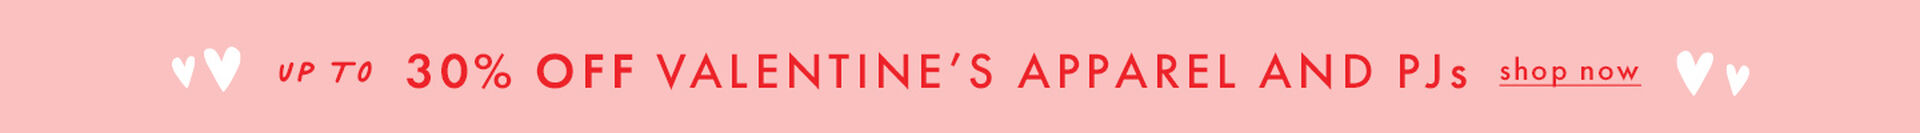 Up to 30% Off Valentine's Apparel & PJs. shop now.